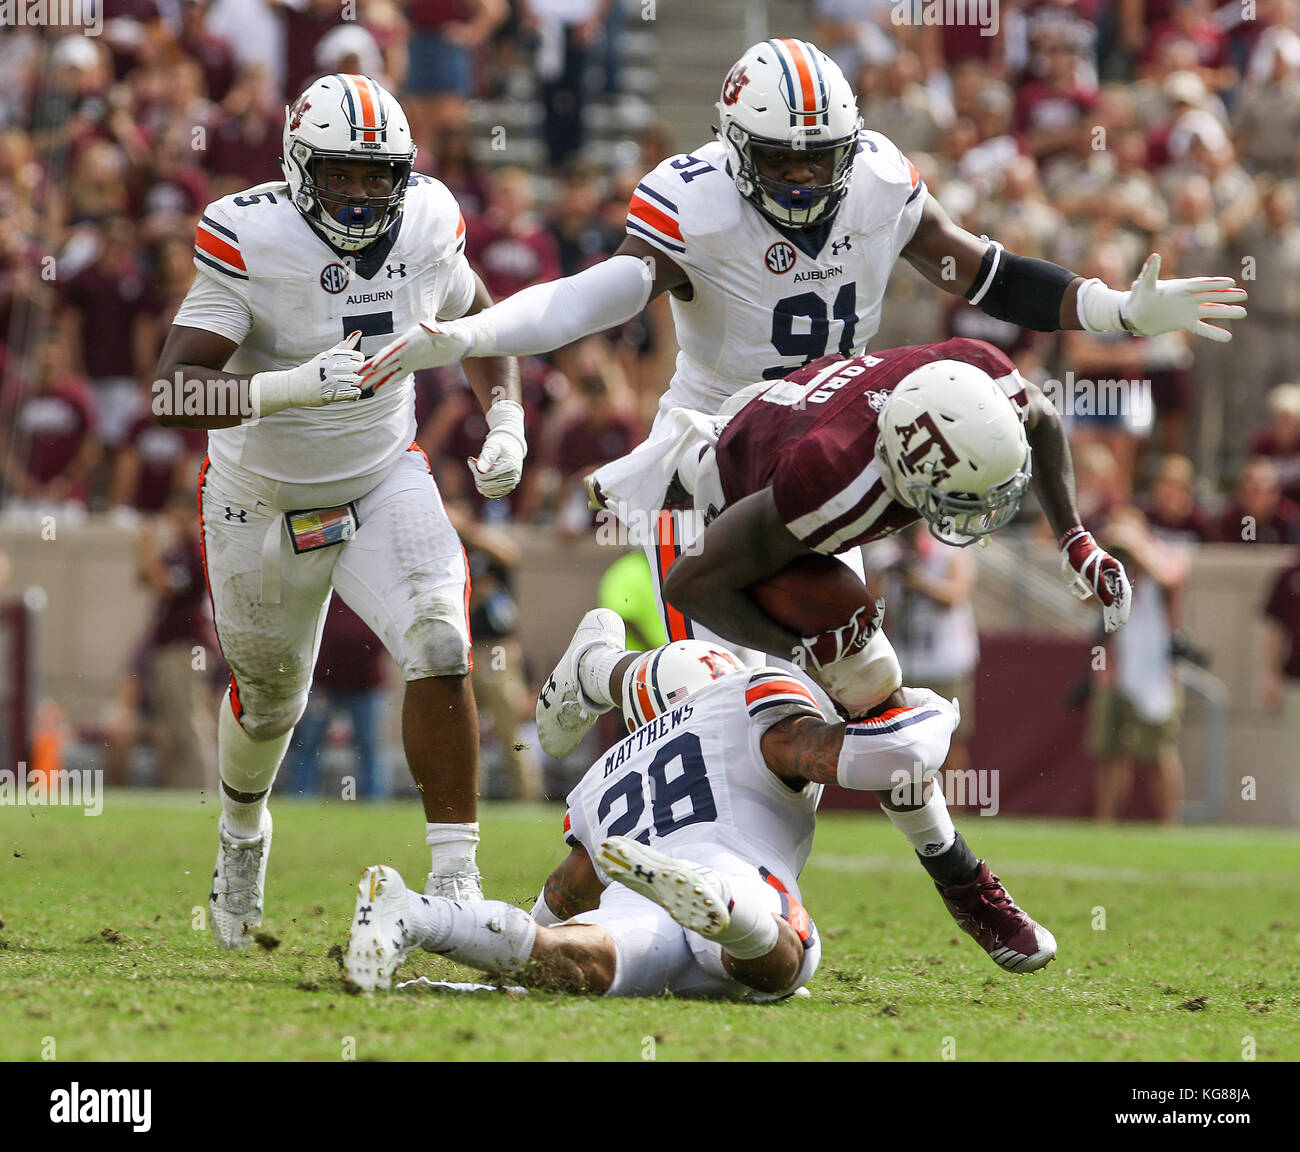 November 4, 2017: Texas A&M Aggies running back Keith Ford (7) is tackled by Auburn Tigers defensive back Tray Matthews (28) and defensive lineman Nick Coe (91) in the third quarter during the NCAA football game between the Auburn Tigers and the Texas A&M Aggies at Kyle Field in College Station, TX; John Glaser/CSM. Stock Photo